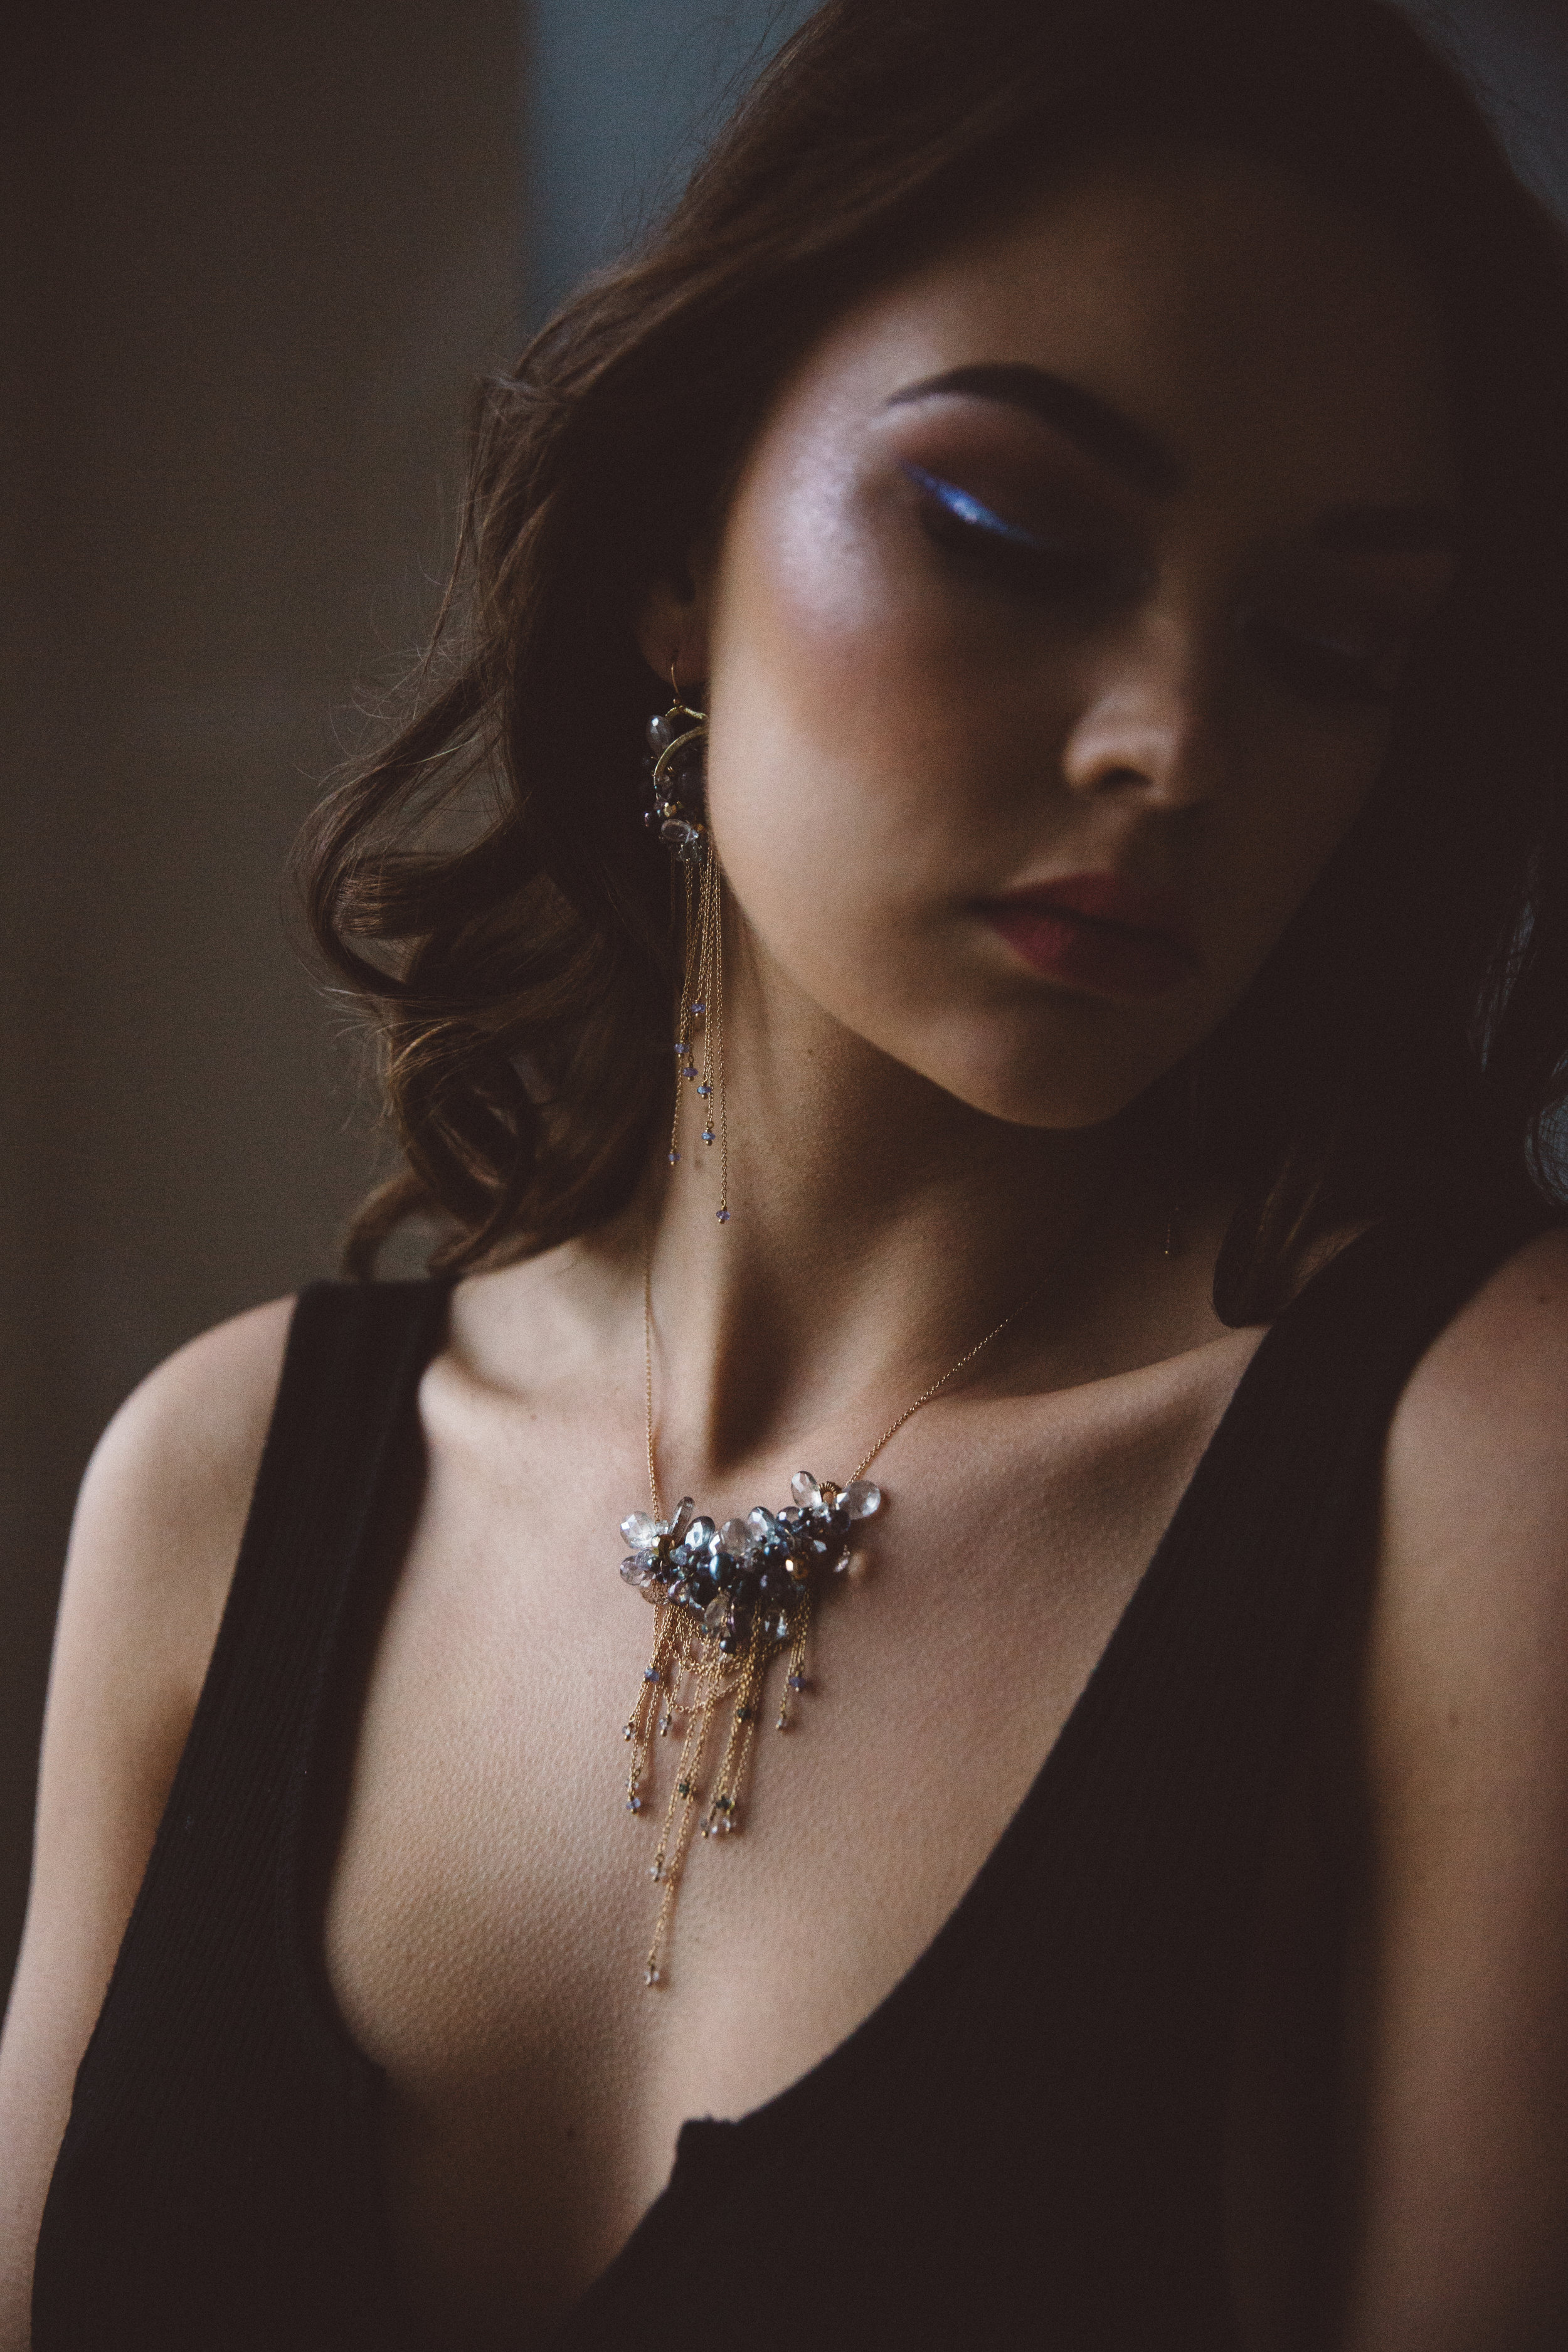 model wearing multi-drop gemstone necklace with delicate gold chains